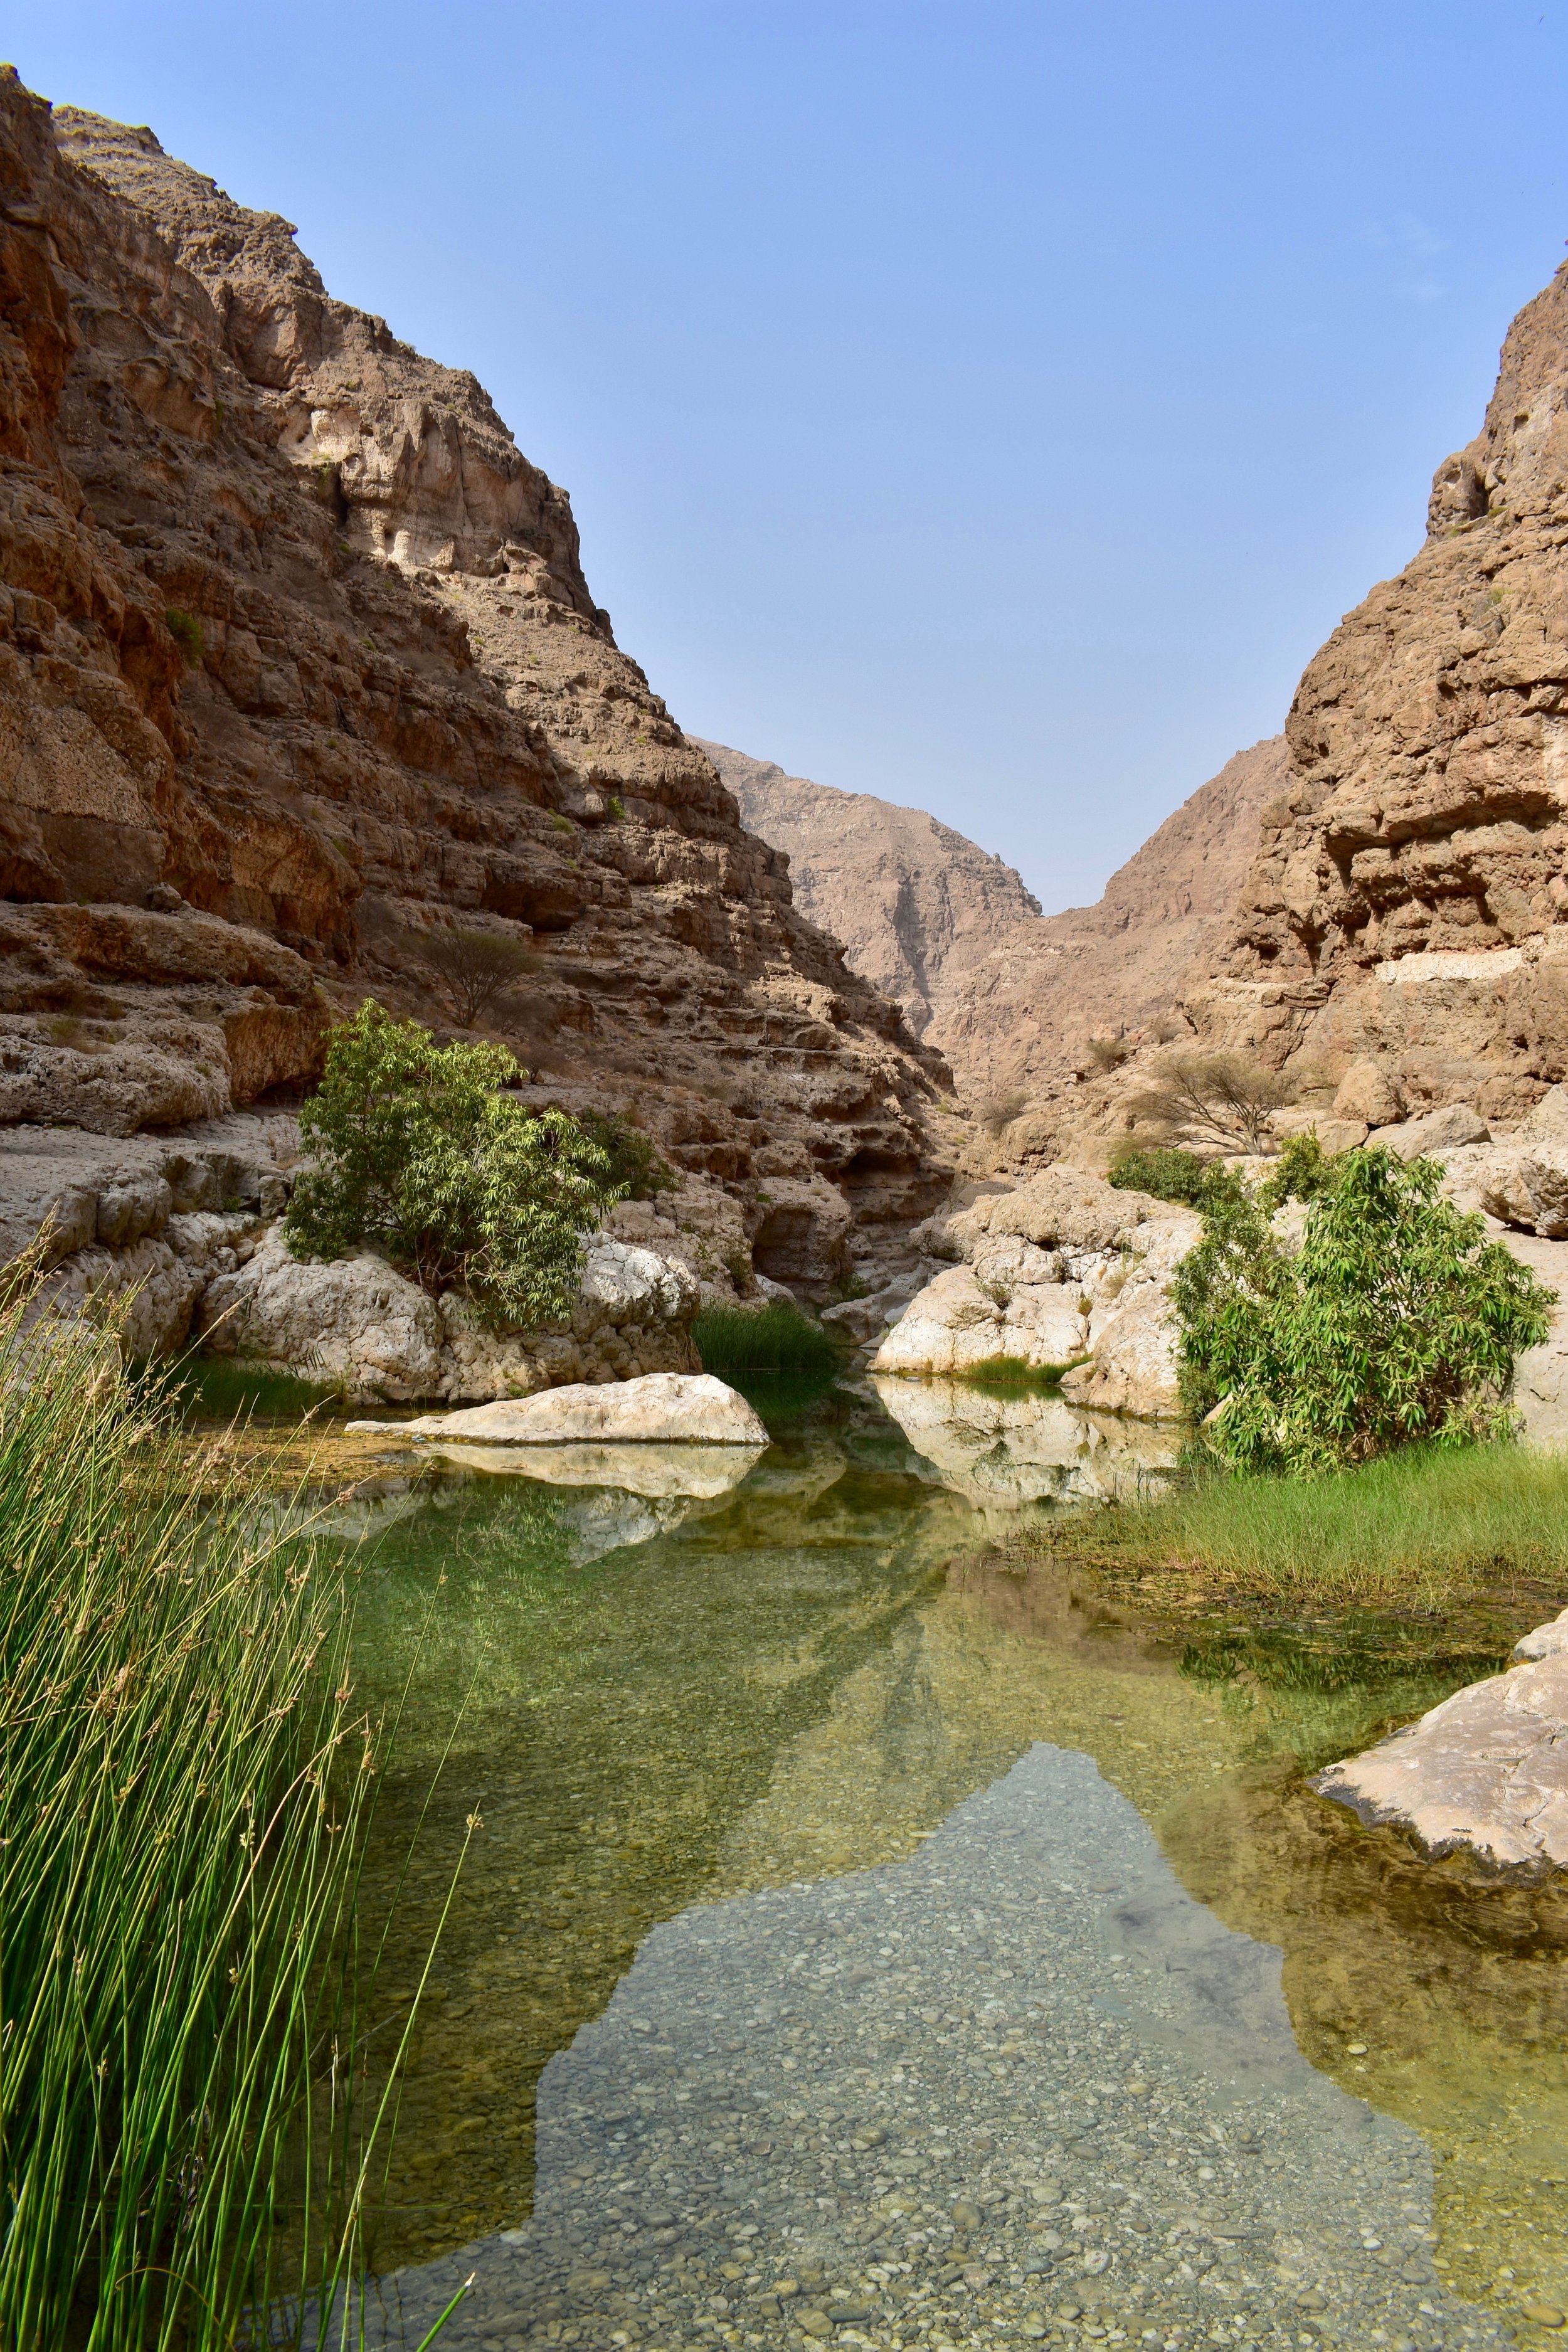  Where we entered the water at Wadi Shab- we swam up through the canyon 